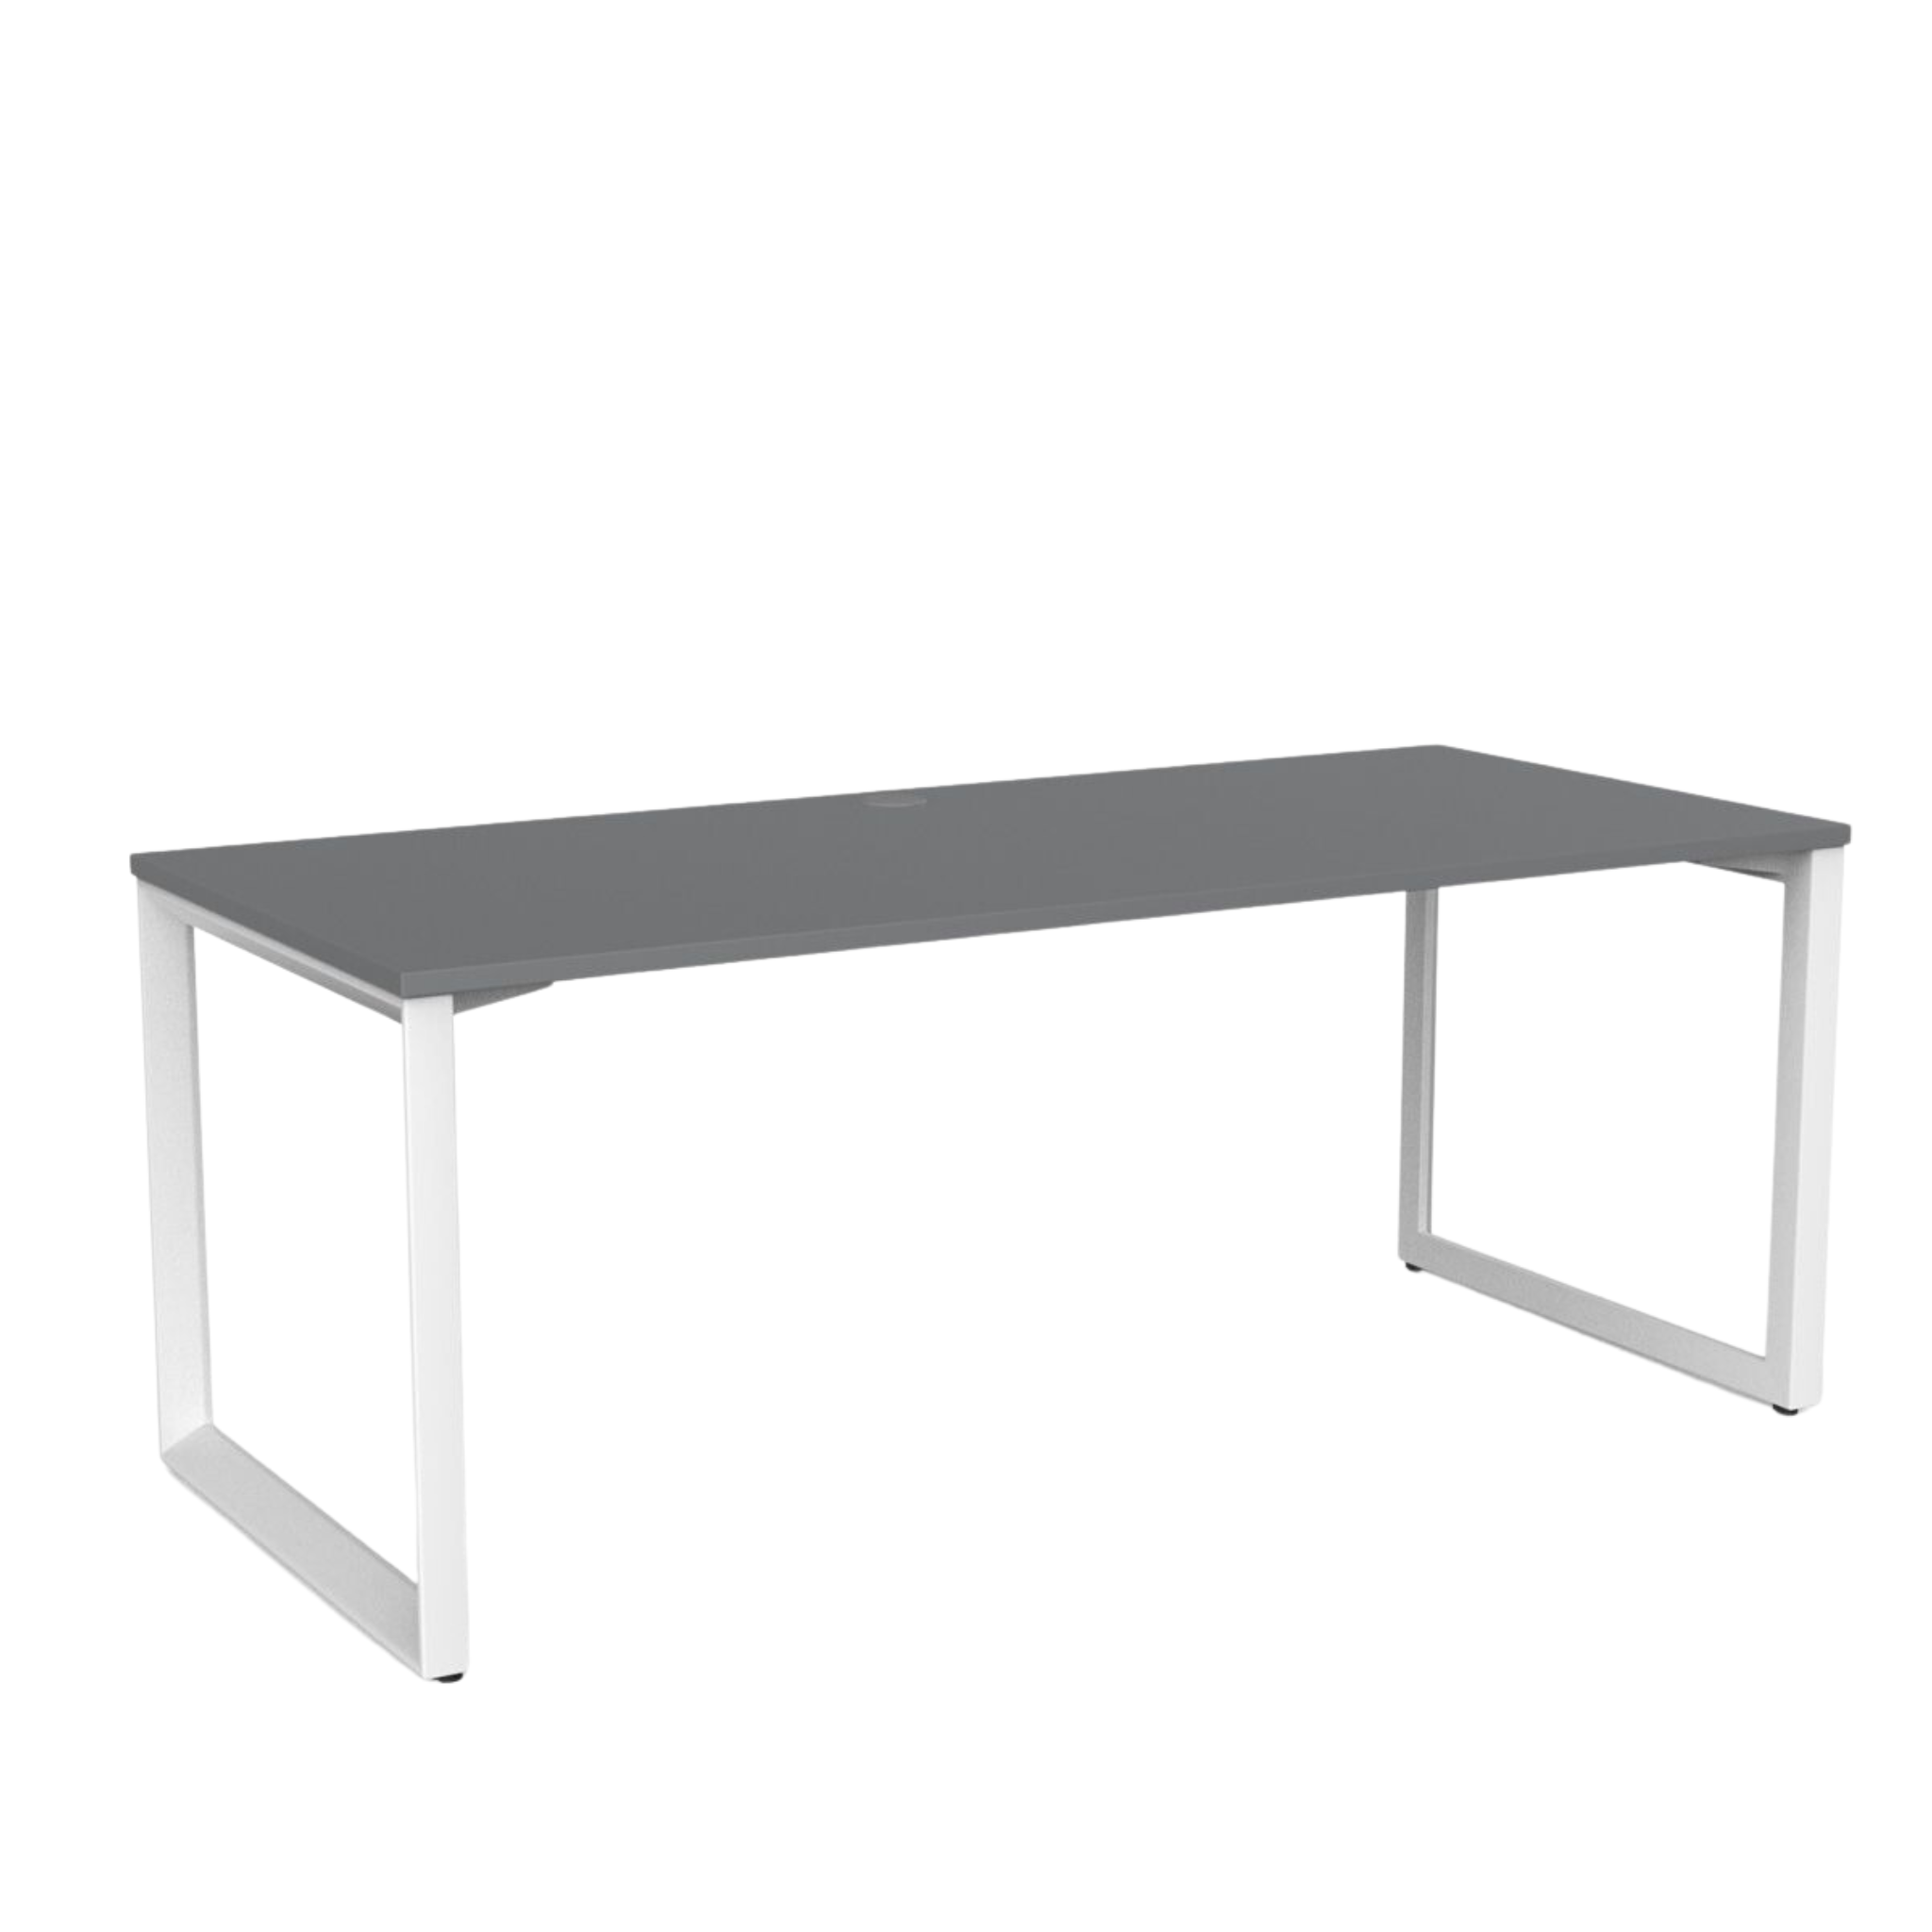 Anvil fixed height desk with white metal frame and silver metleca top